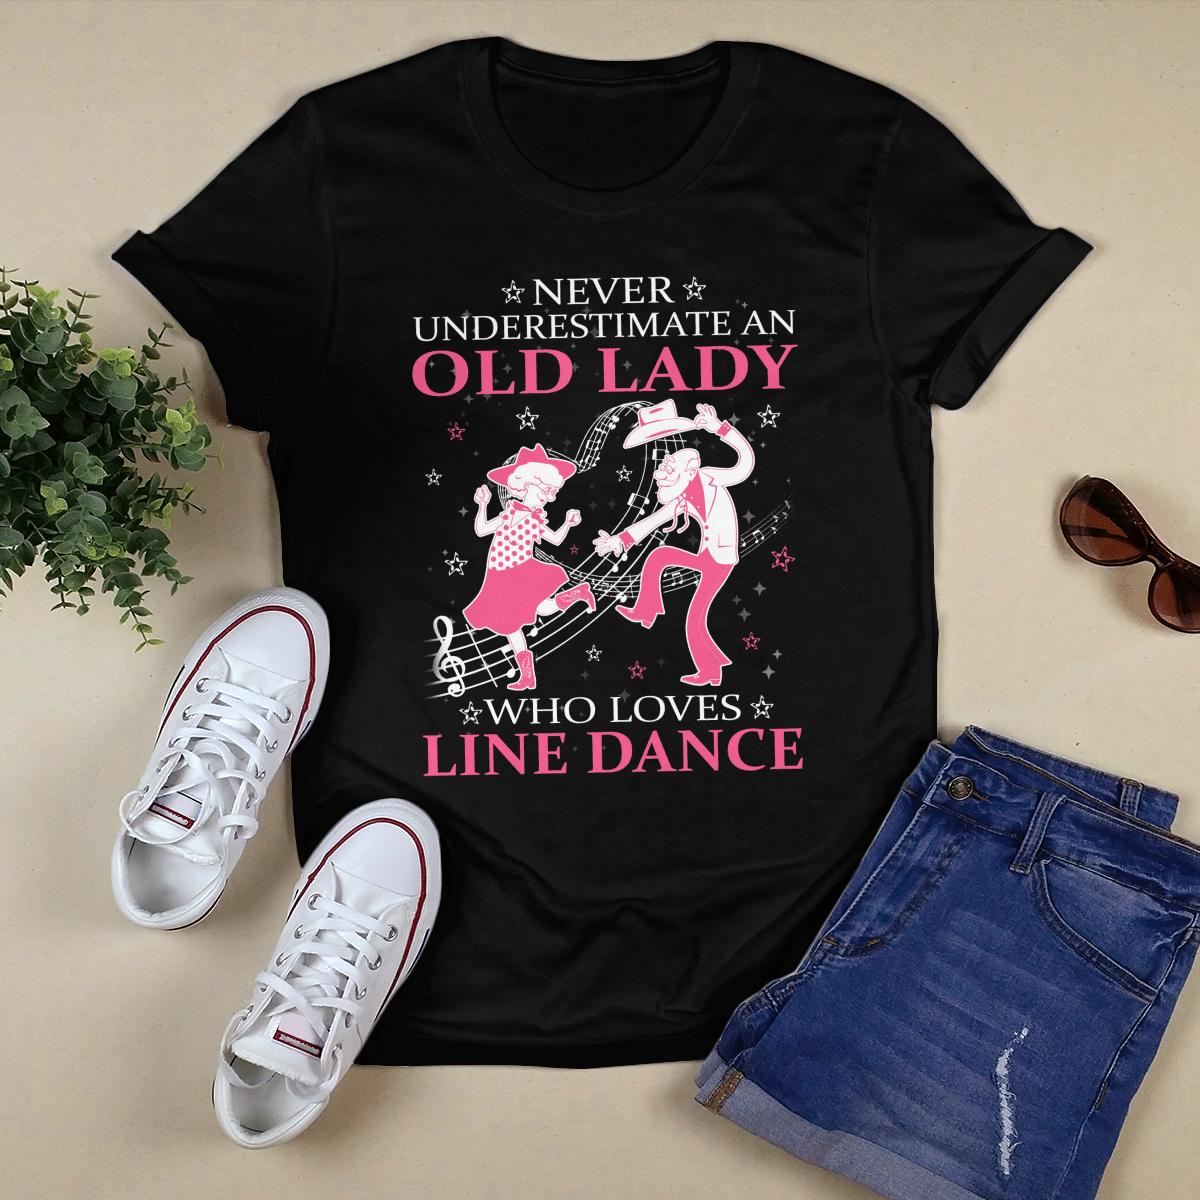 Never underestimate an old lady who loves line dance - Old lady line dancer, old people line dancing